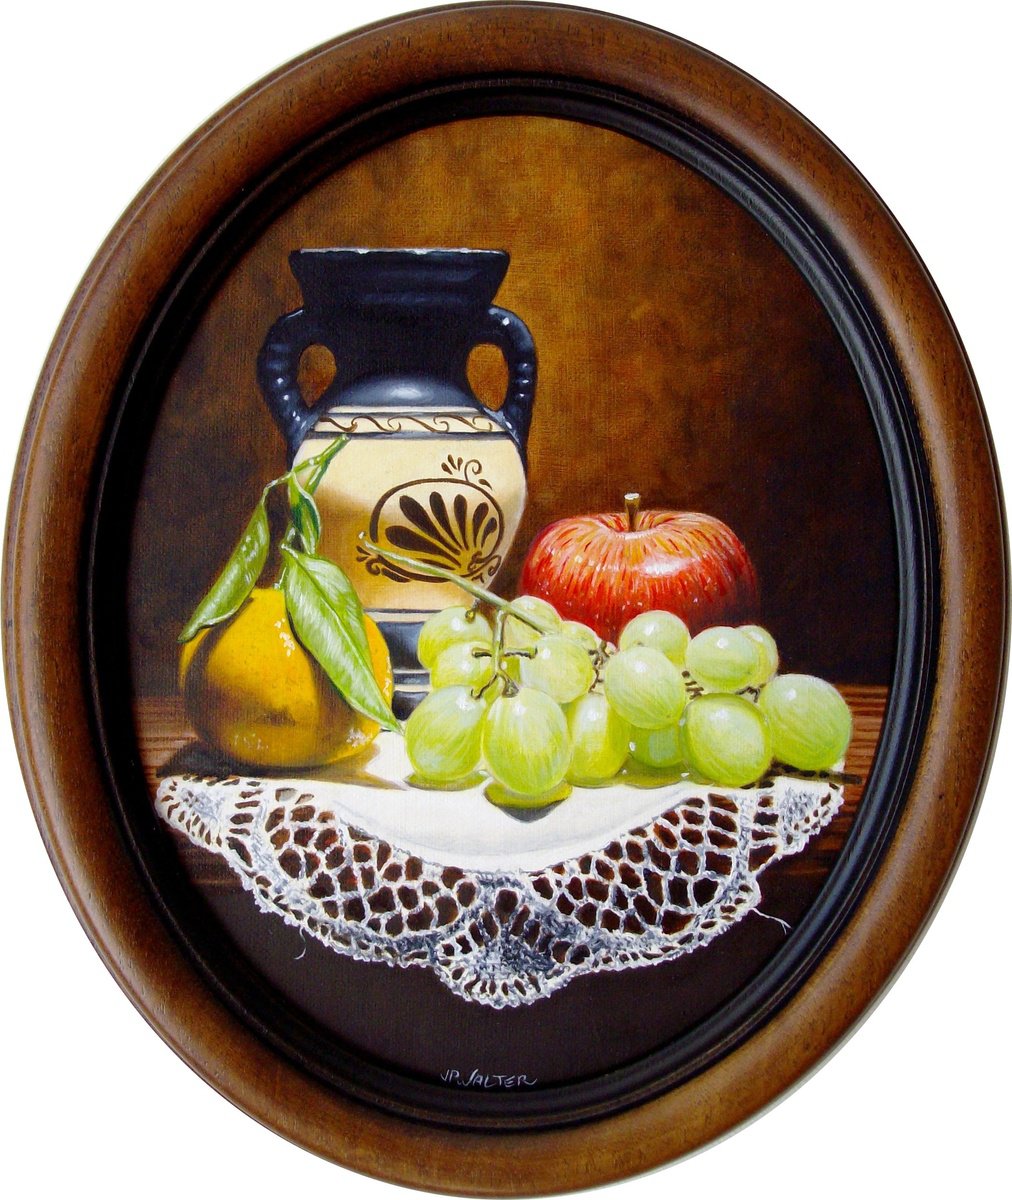 Still life with grapes and greek amphora on lace by Jean-Pierre Walter